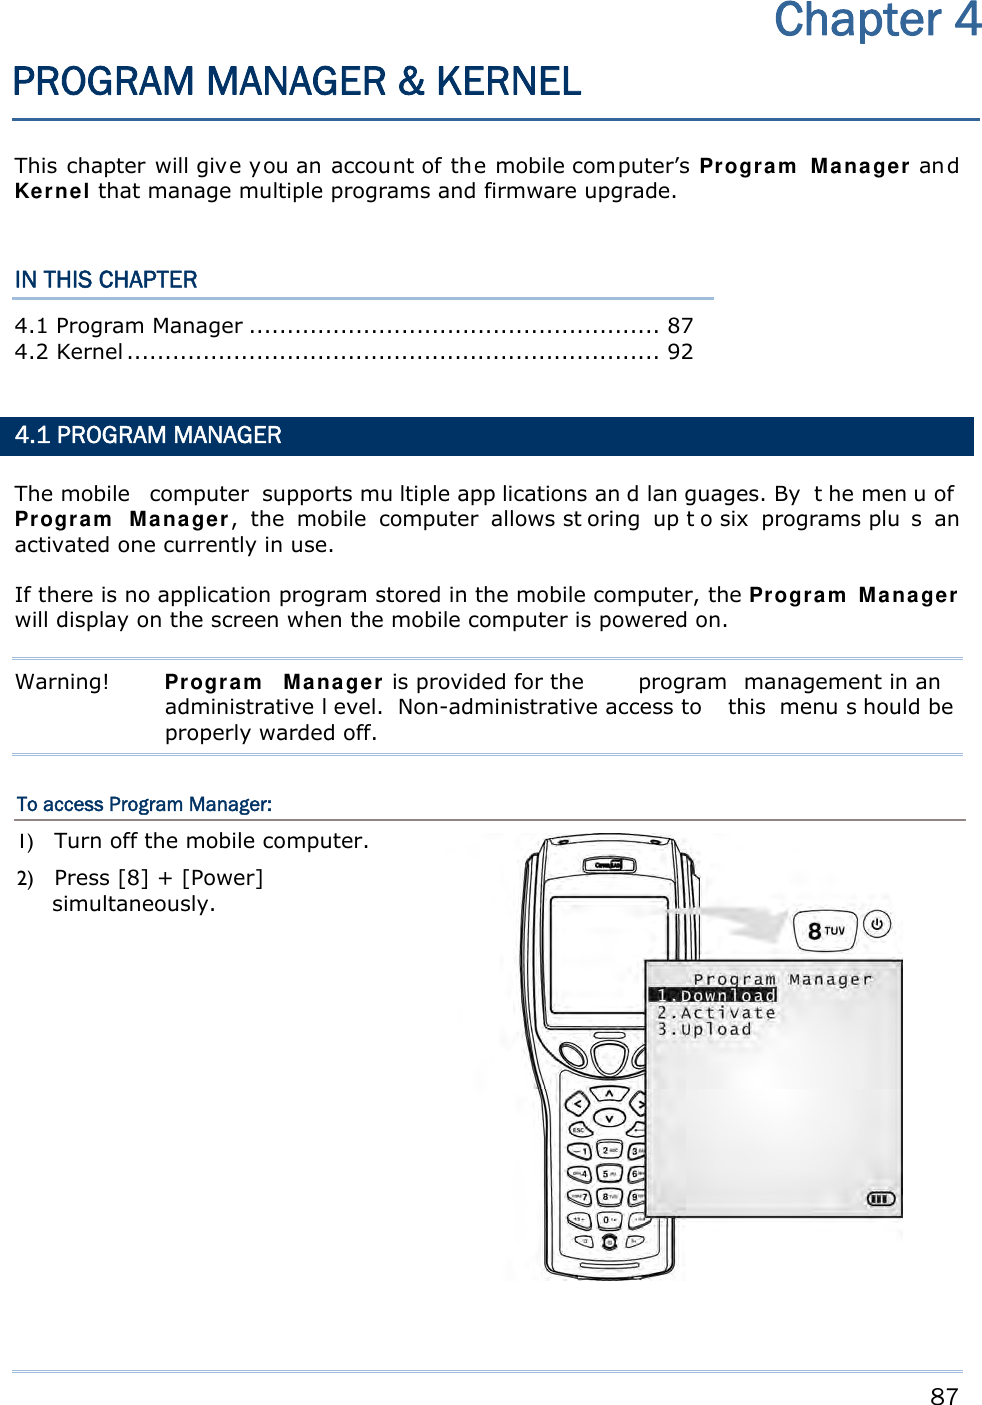     87   This chapter will give you an account of the mobile computer’s Program Manager an d Kernel that manage multiple programs and firmware upgrade.  IN THIS CHAPTER 4.1 Program Manager ...................................................... 87 4.2 Kernel ...................................................................... 92   4.1 PROGRAM MANAGER The mobile  computer supports mu ltiple app lications an d lan guages. By  t he men u of Program Manager, the mobile computer allows st oring up t o six  programs plu s an activated one currently in use. If there is no application program stored in the mobile computer, the Program Manager will display on the screen when the mobile computer is powered on. Warning!  Program Manager is provided for the  program management in an  administrative l evel. Non-administrative access to  this menu s hould be properly warded off. To access Program Manager: 1) Turn off the mobile computer. 2) Press [8] + [Power] simultaneously.   Chapter 4 PROGRAM MANAGER &amp; KERNEL 